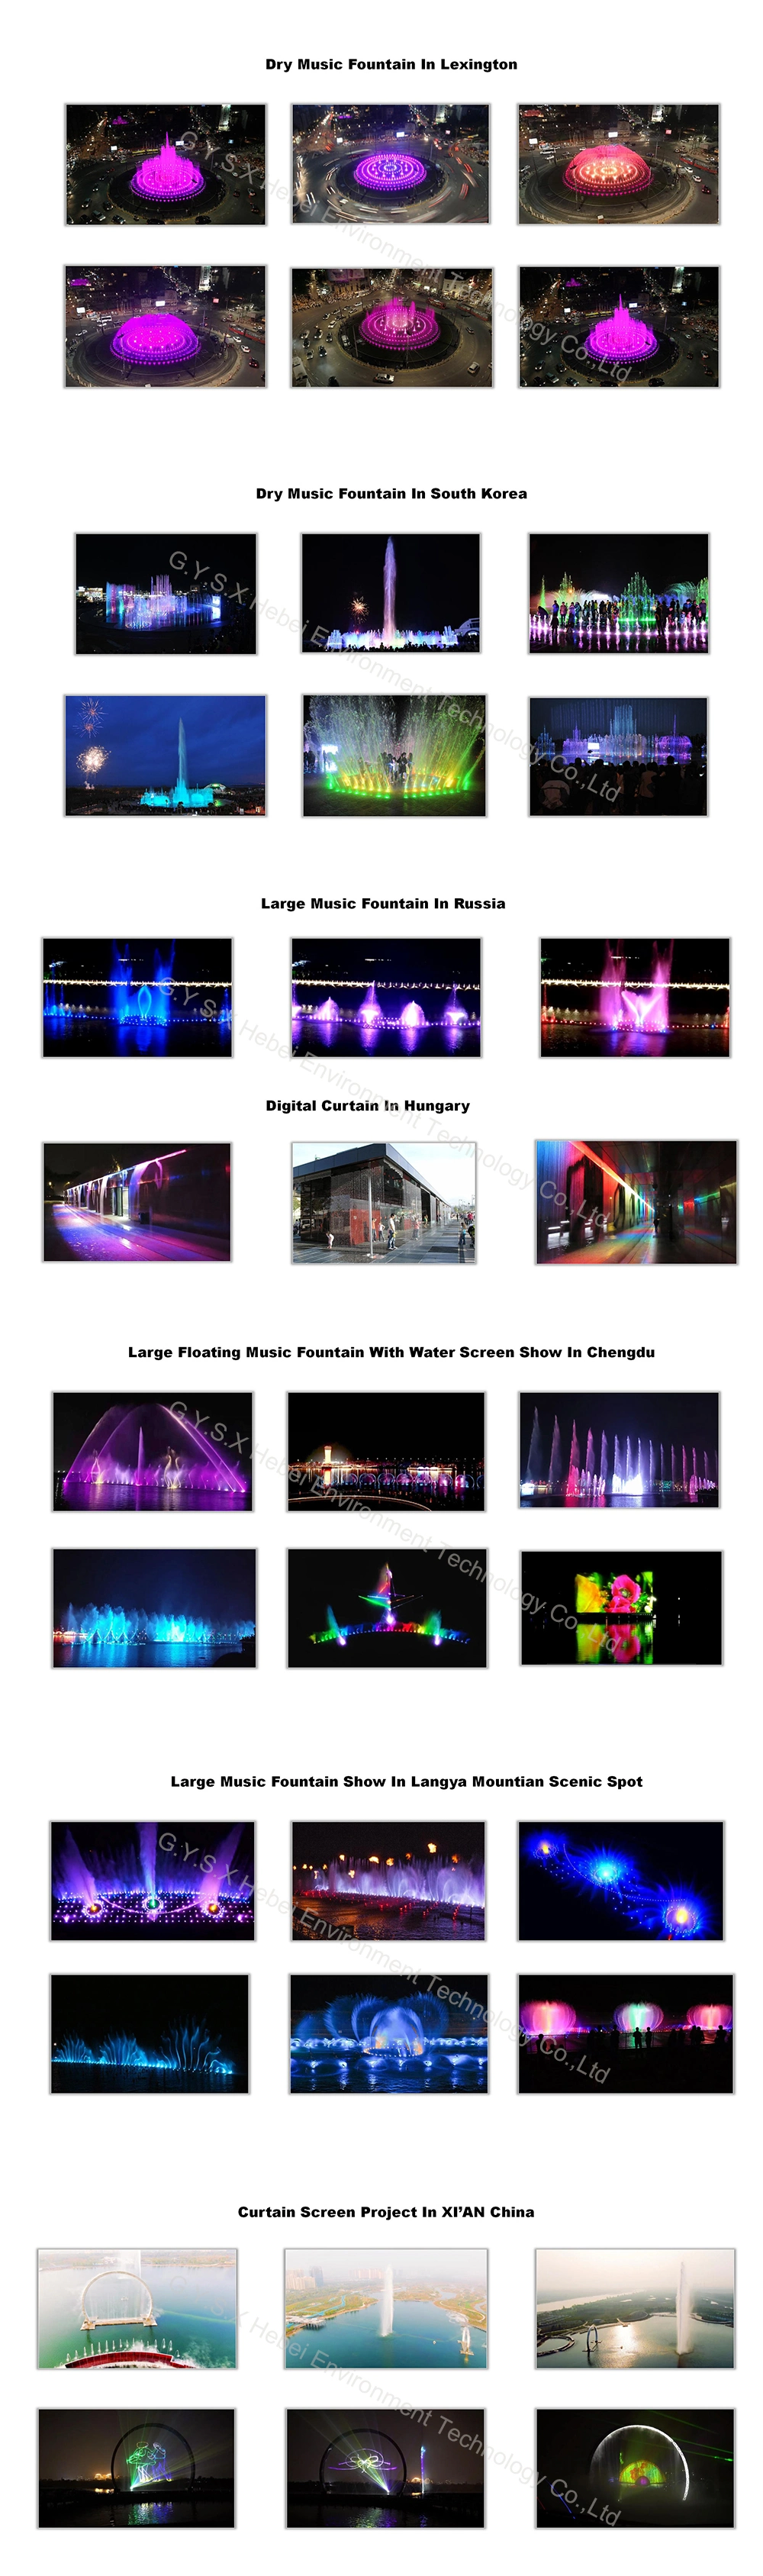 Large Outdoor Musical Floating Dancing Water Fountains Equipment Laser Show for Sale